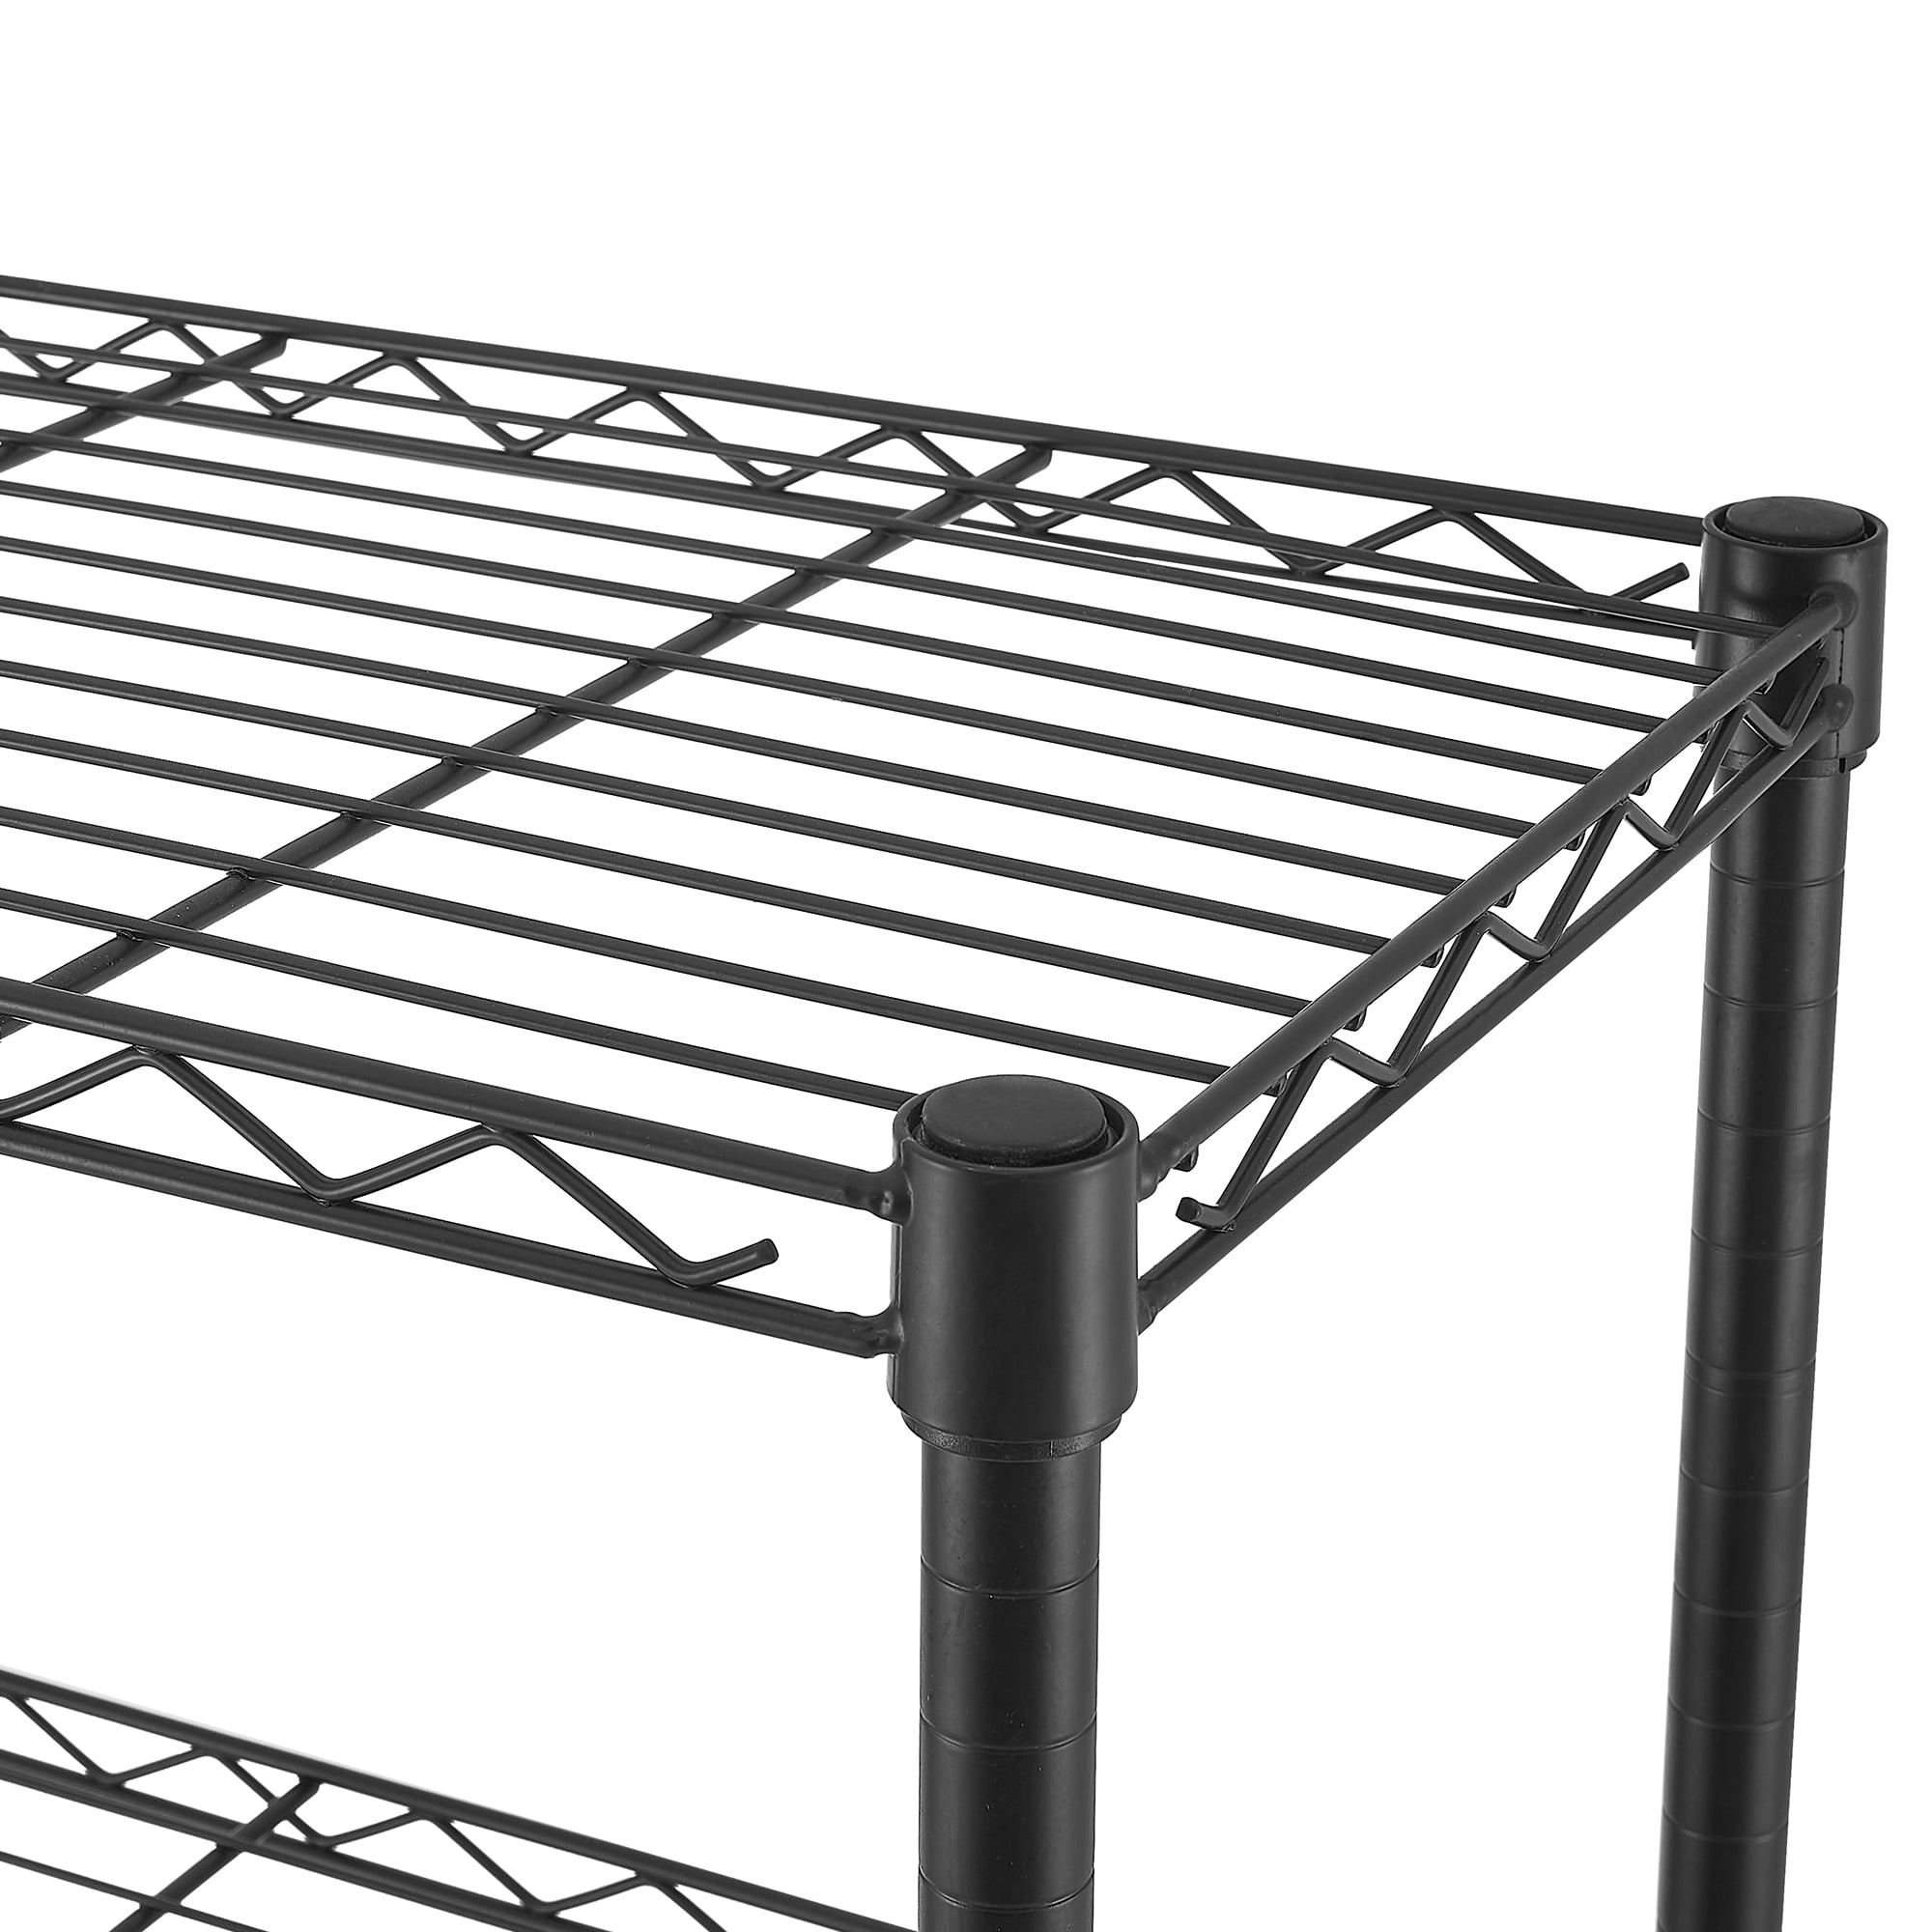 SEGMART Metal Storage Shelves， Heavy Dutyandnbsp;5-Tier Wire Storage Shelf for Kitchen， Sturdy Metal Shelving with Adjustable Height for Holding Stand Mixers Microwaves Dishes， Black